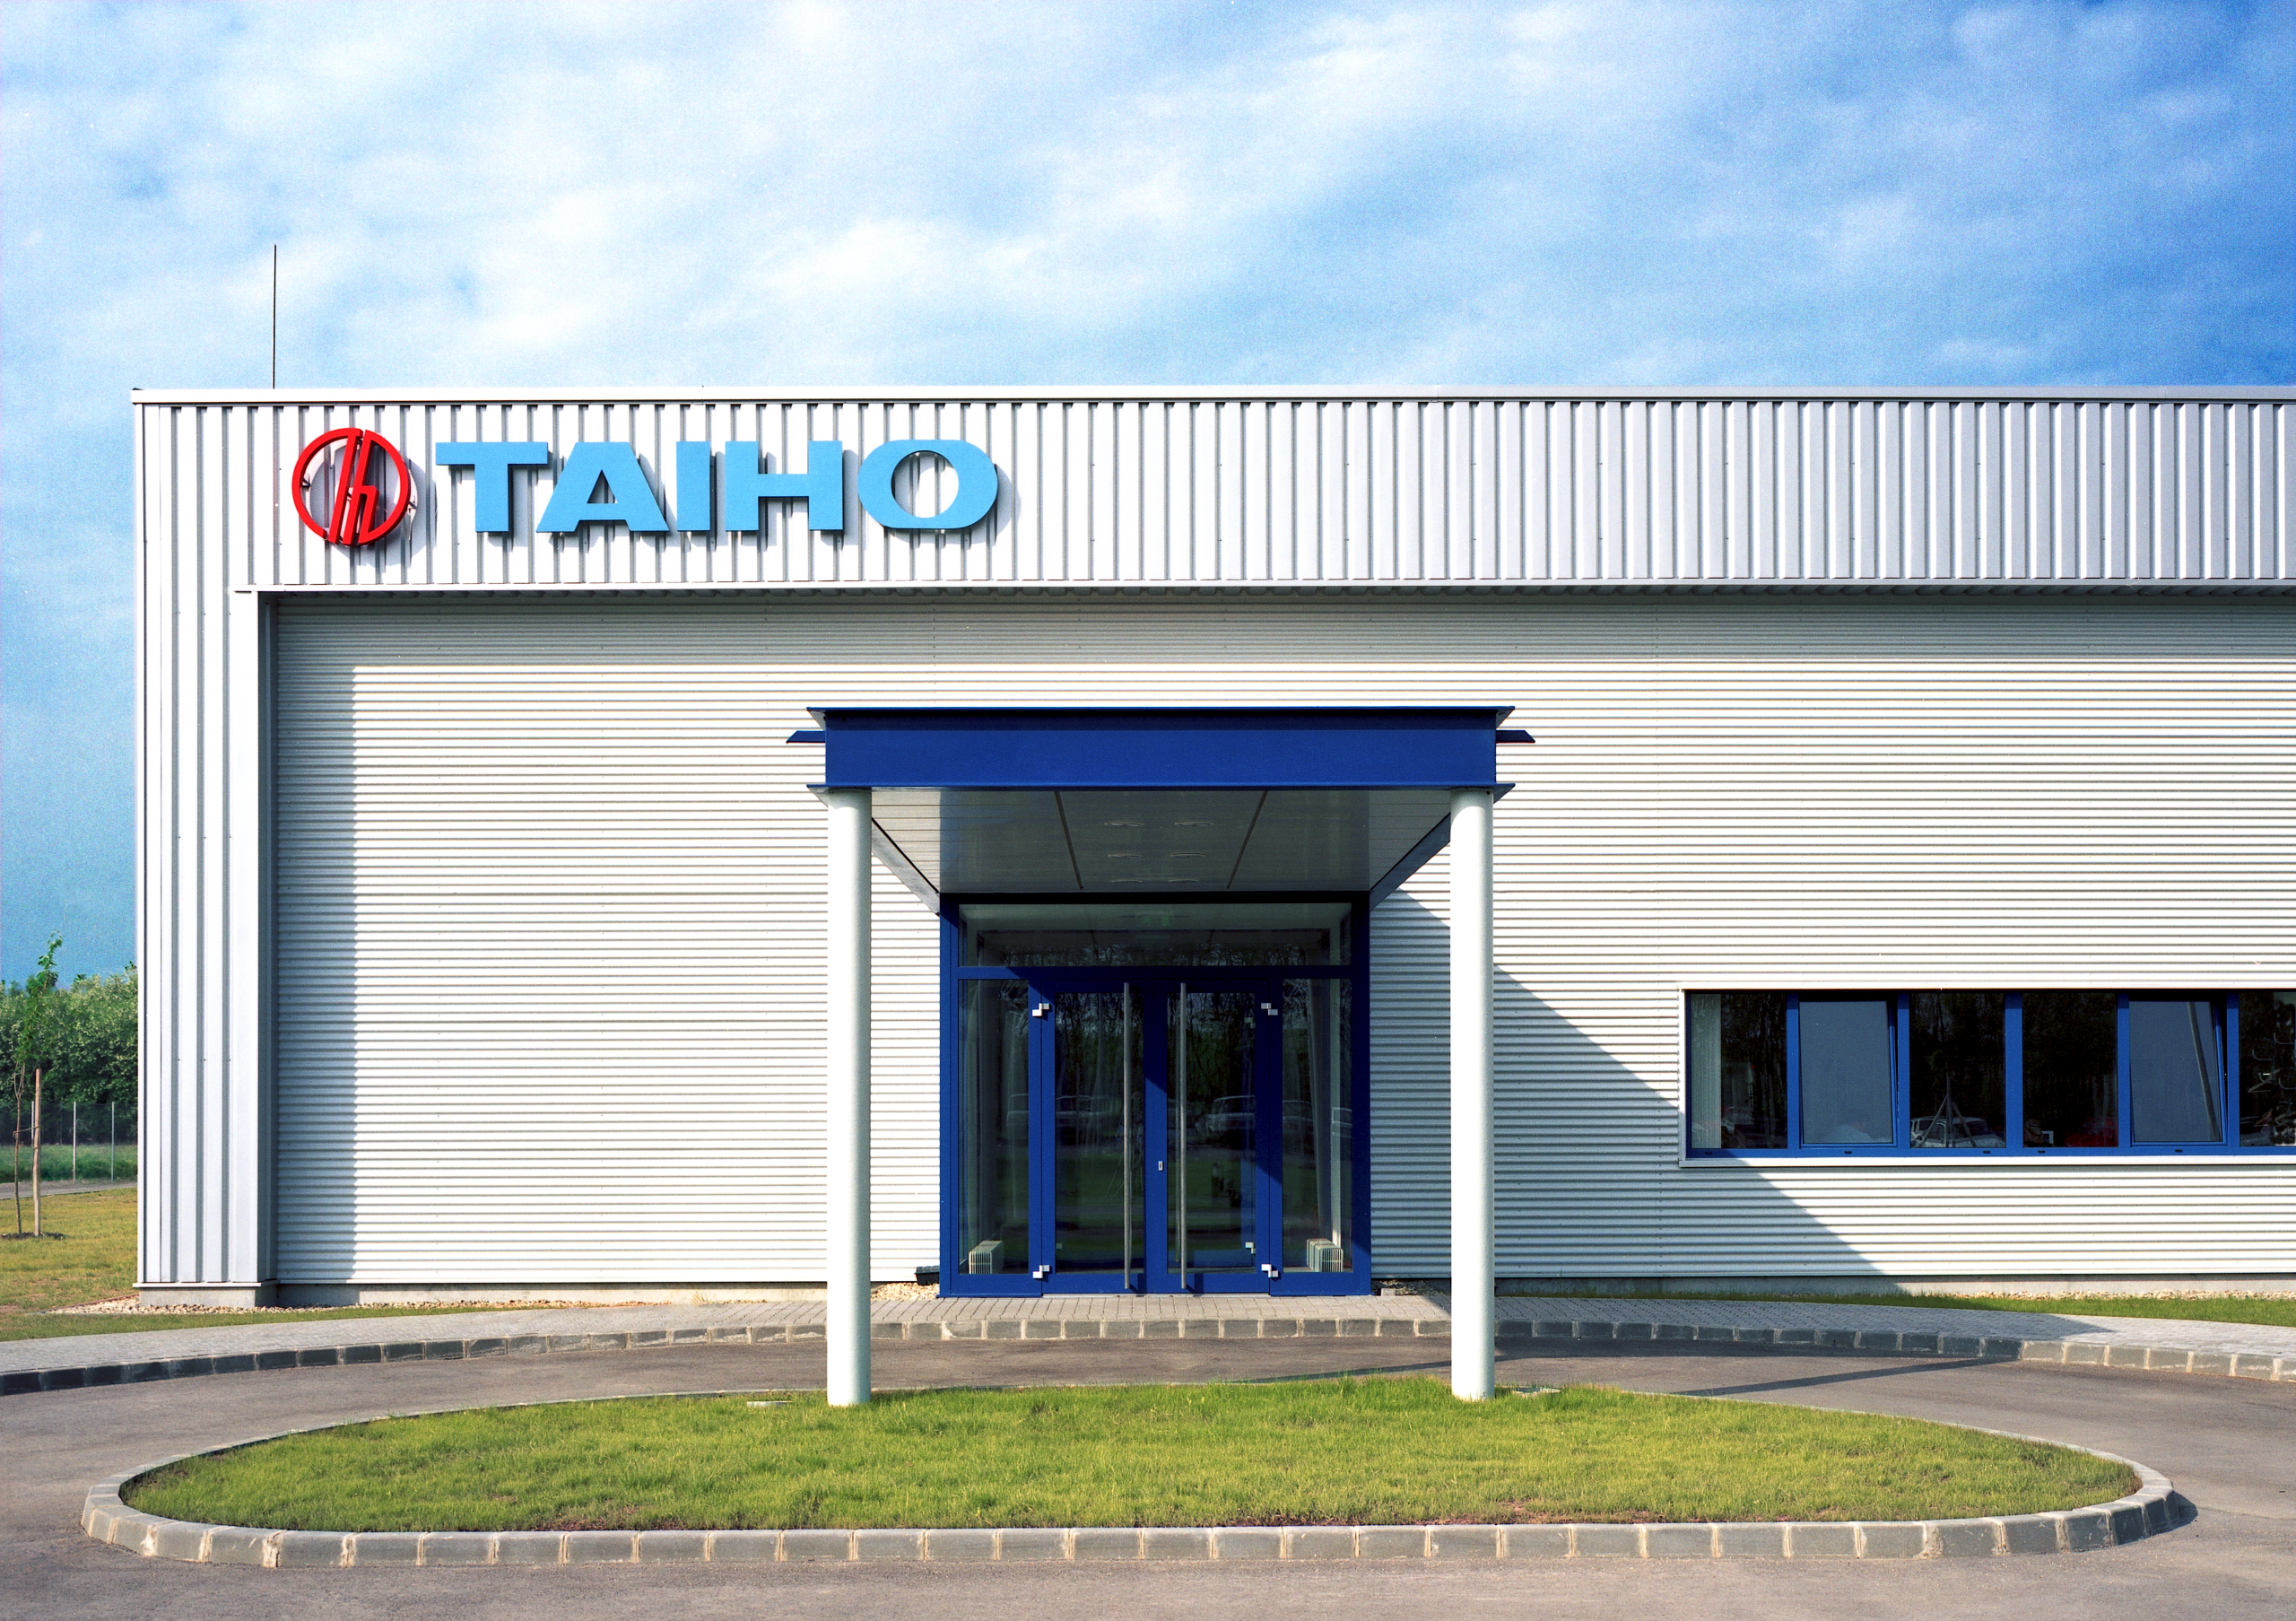 Factory Taiho Corporation of Europe Kft. built by Takenaka Europe in 2005. Modern industrial building facade with vertical white sheet metal panels, large blue entrance portal and company logo "TAIHO" in red and blue.